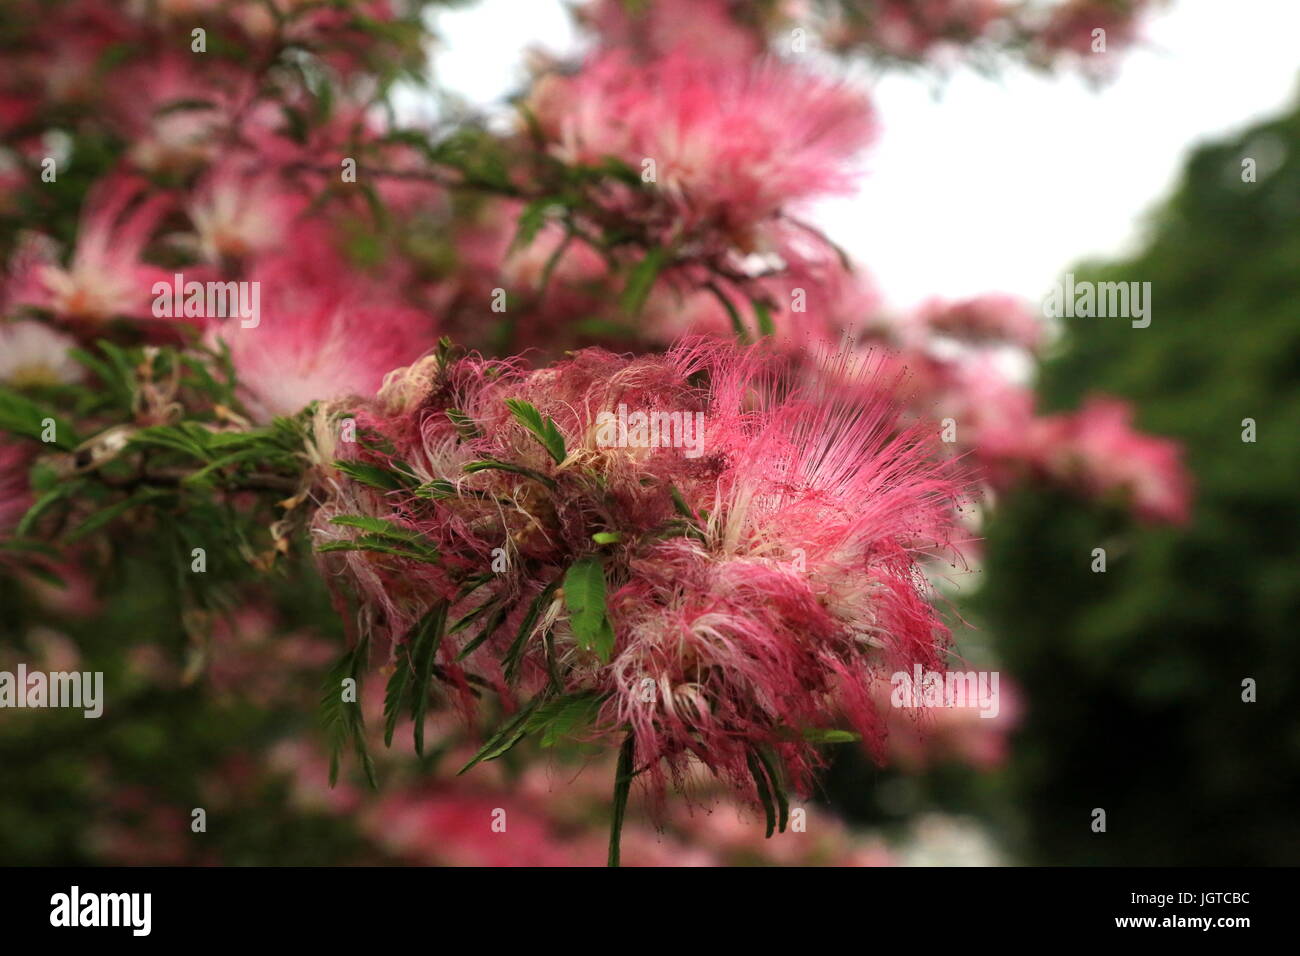 A Persian silk tree in bloom in Yamato, Japan.  In the U.S., these trees are often refered to as a type of Mimosa. Stock Photo